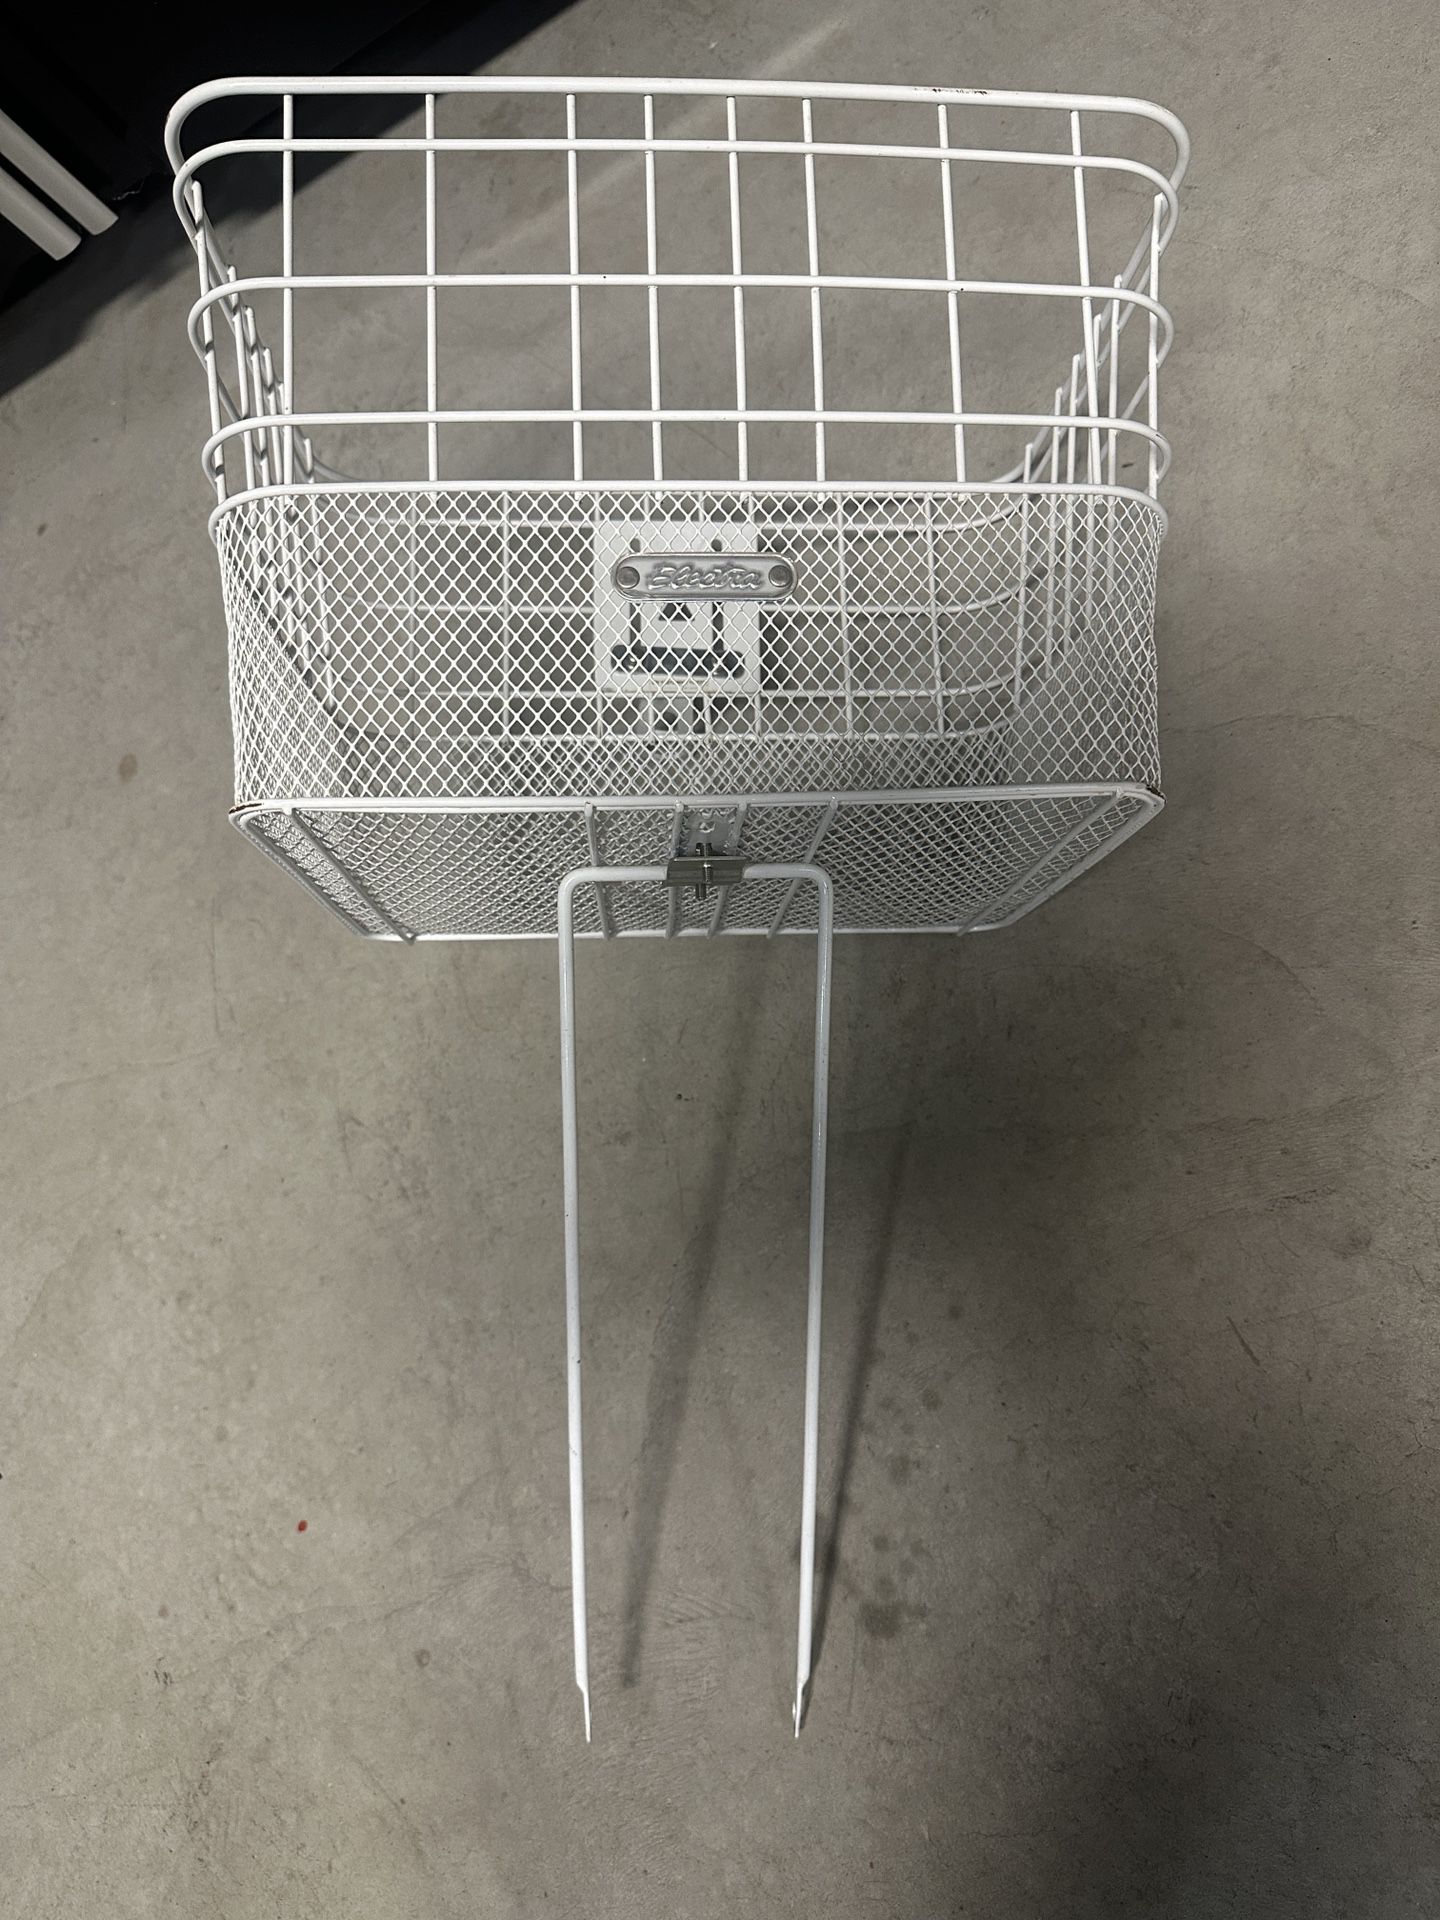 ELECTRA White Metal Basket For Beach Cruiser Bike. Will Fit Other Bikes Too!